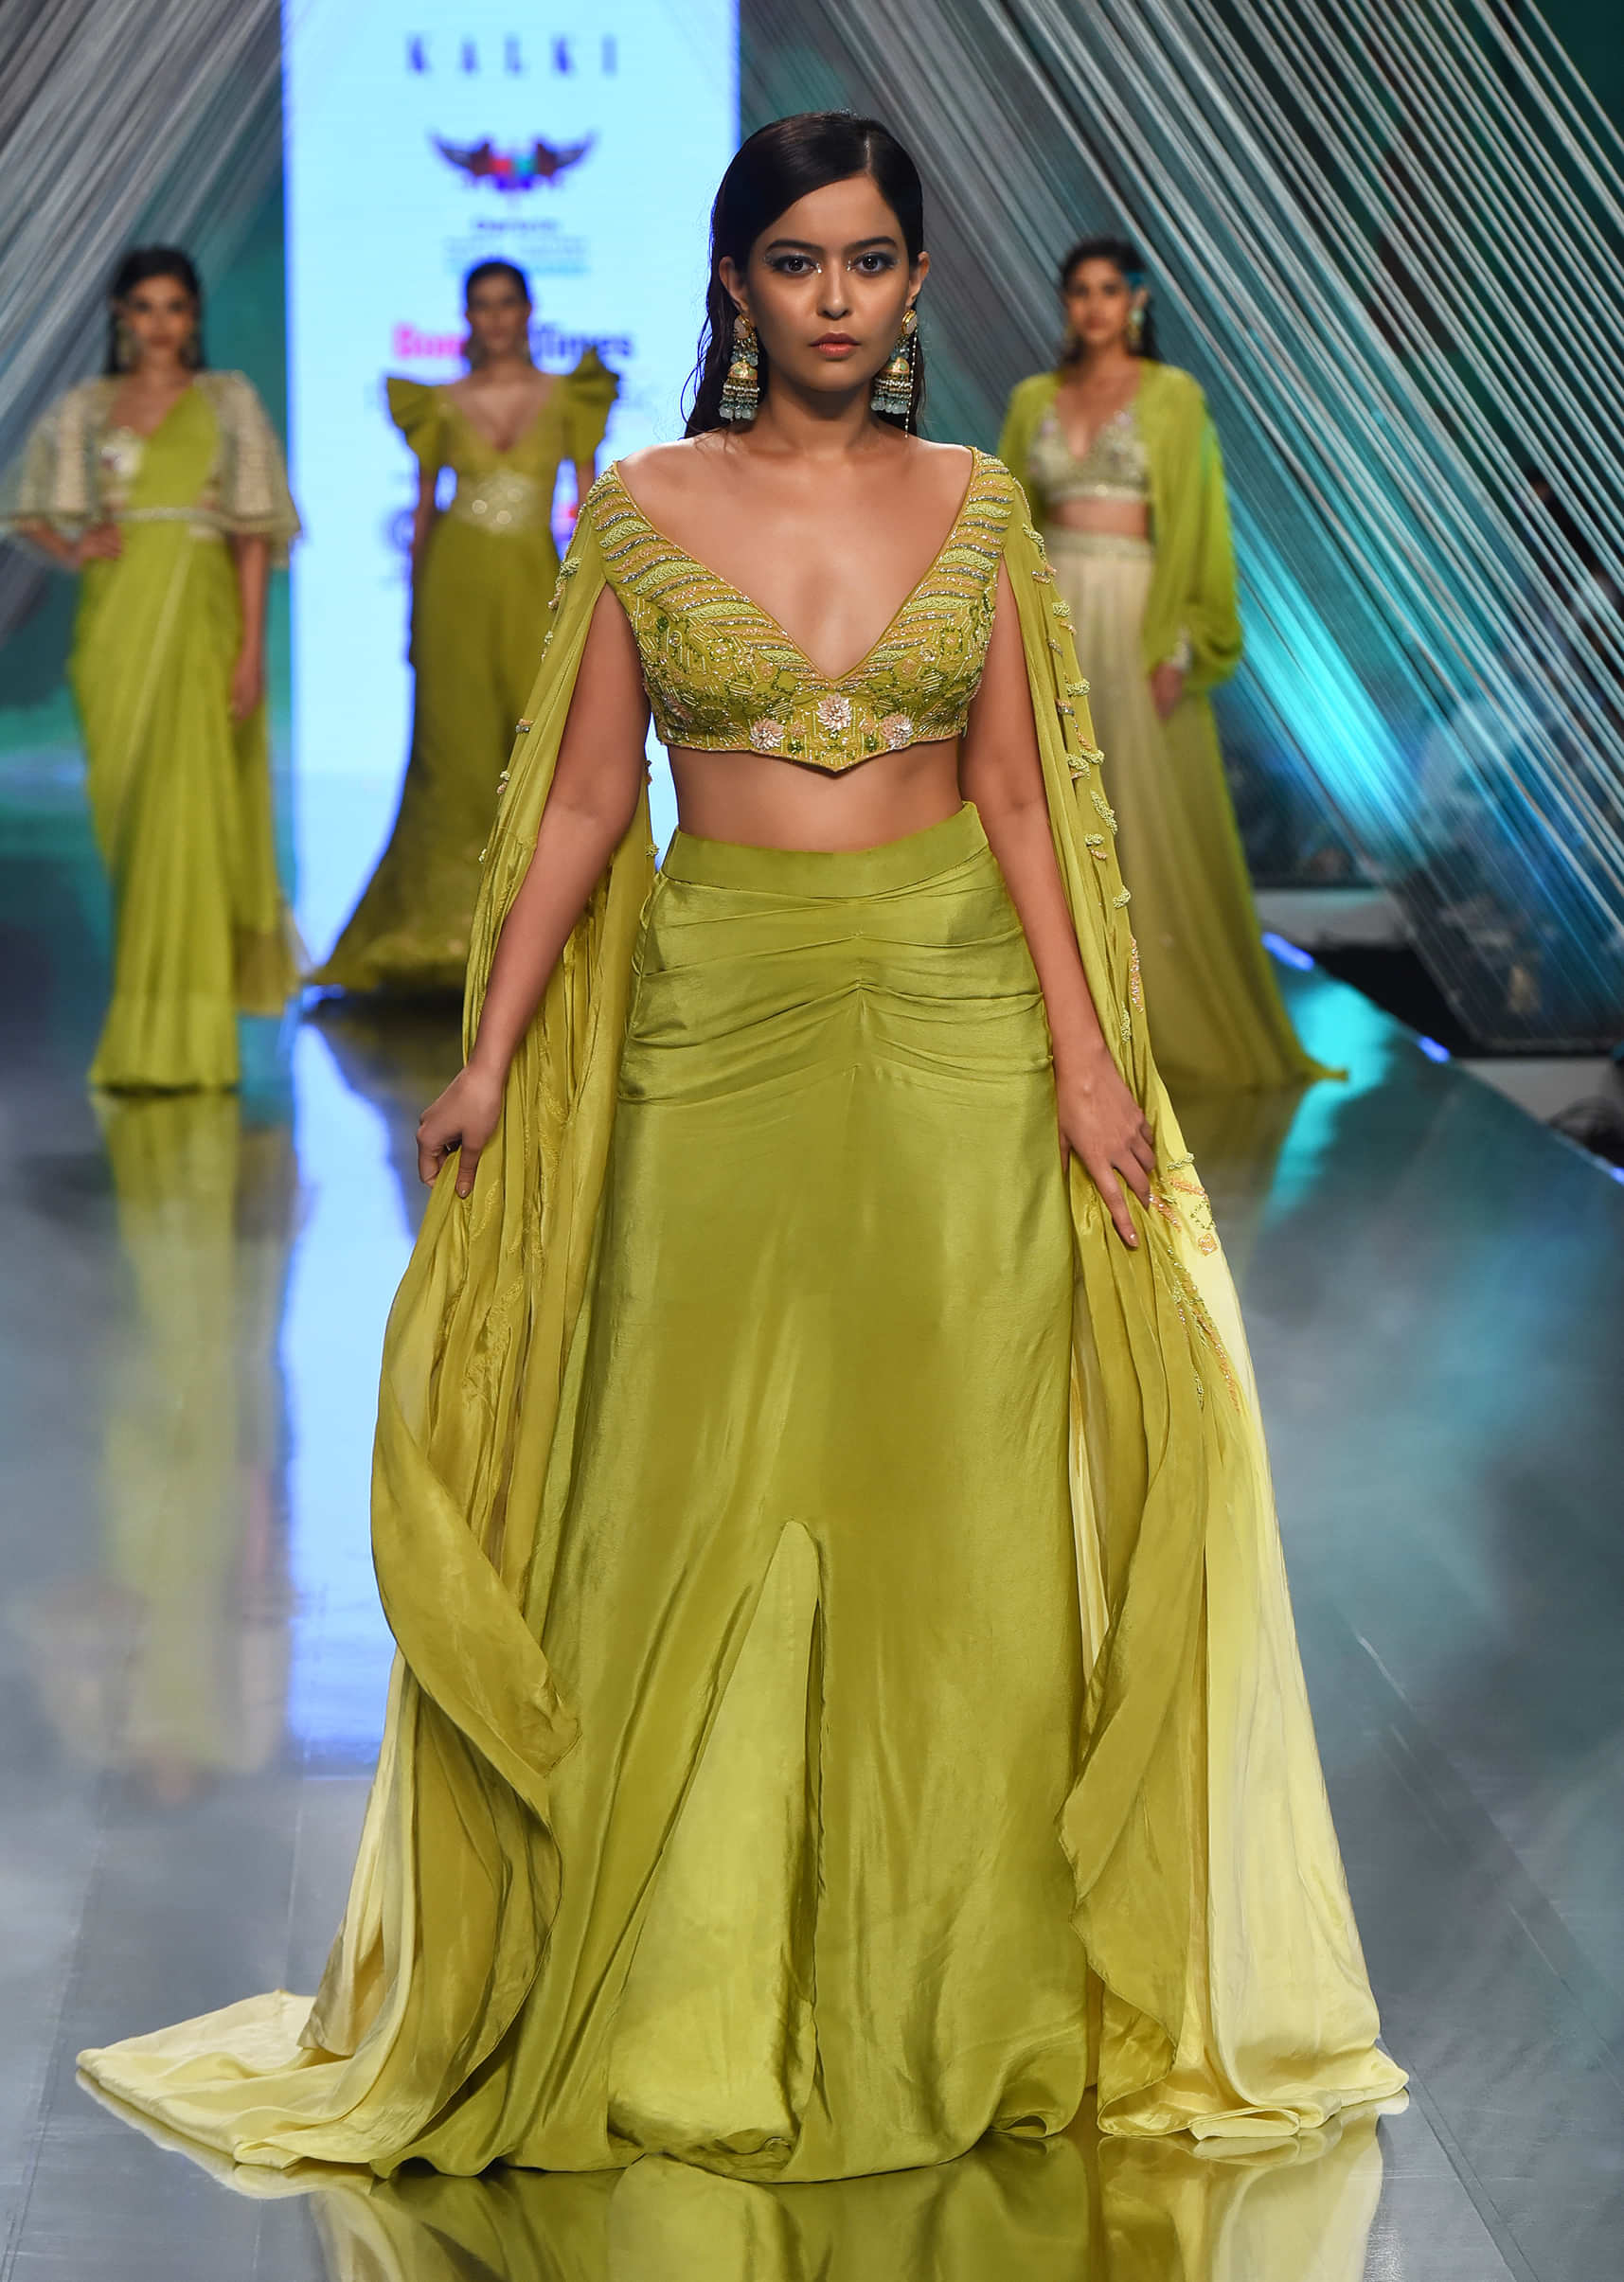 Citrus Mermaid Dhoti Skirt With A Crop Top In Long Cape Embroidered Sleeves, Plunging V Neckline In Embroidery